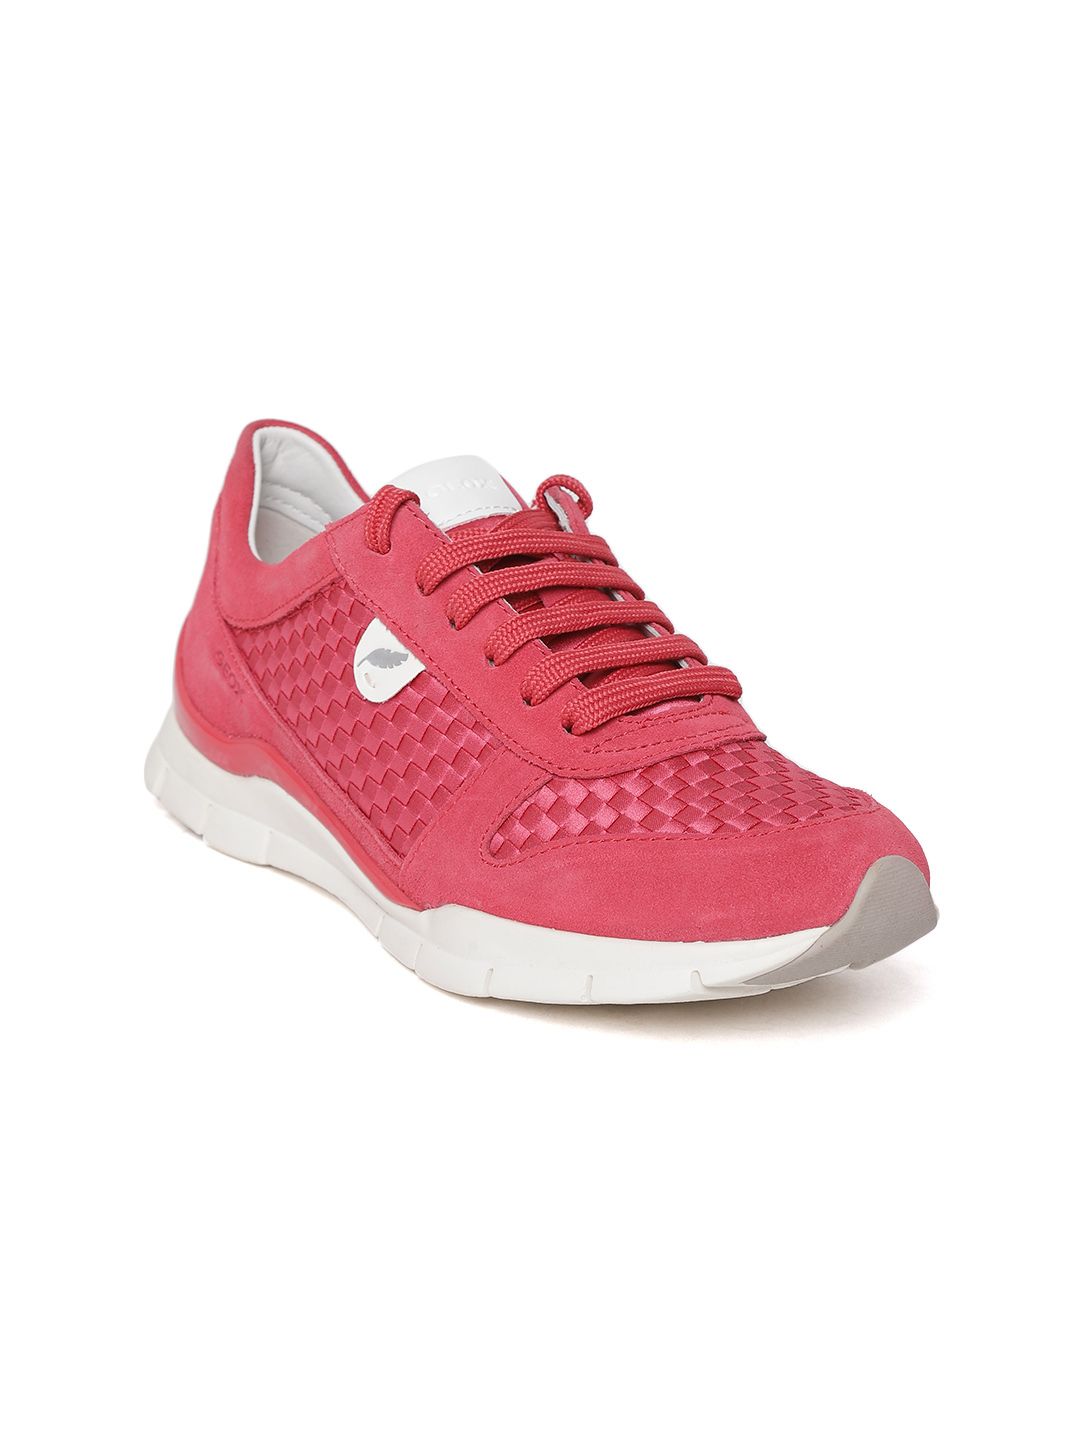 Geox Women Coral Pink Textured Sneakers Price in India